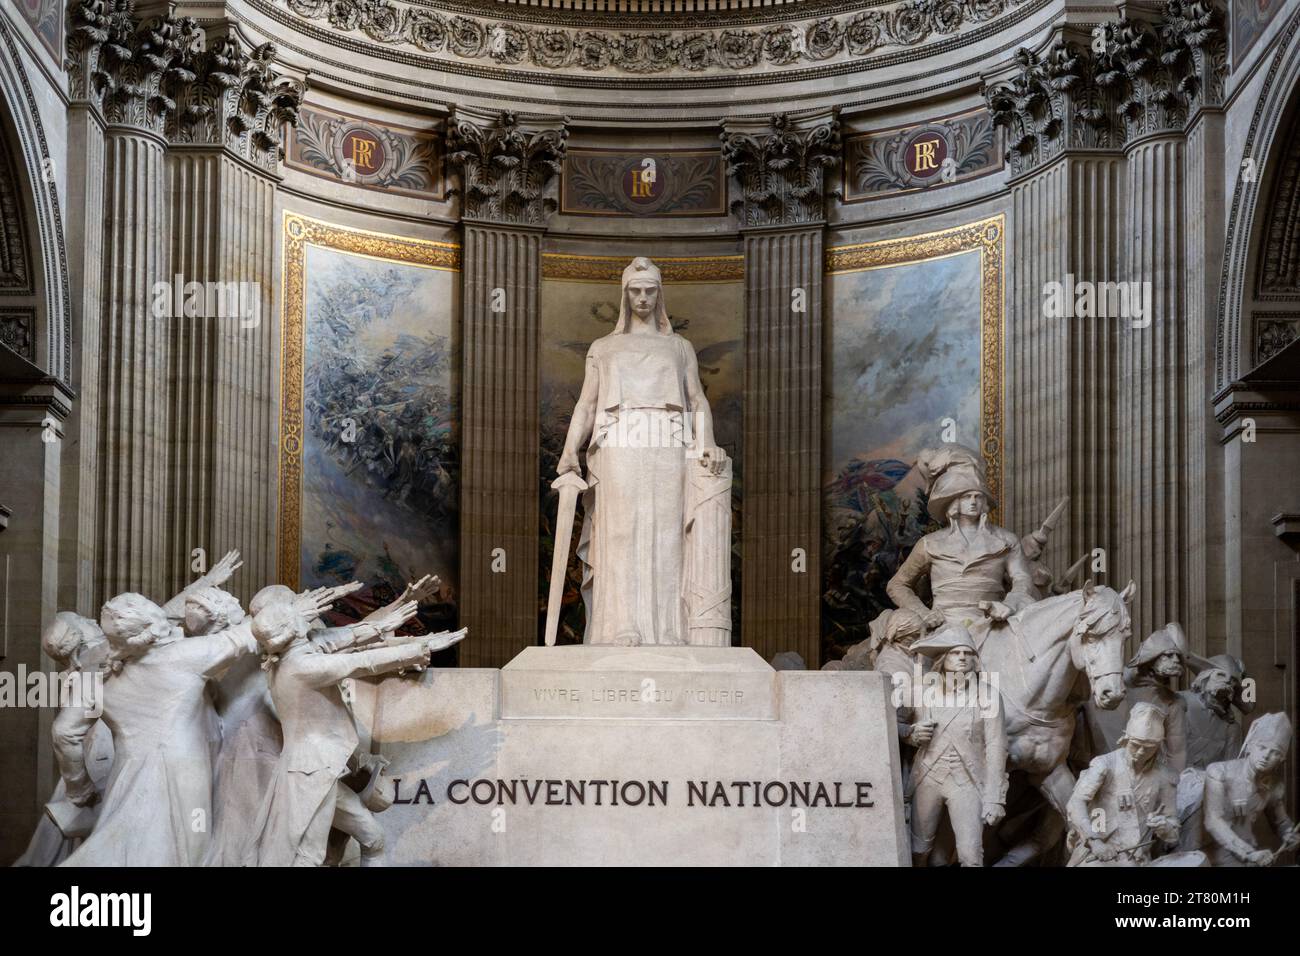 La convention nationale in the pantheon in paris Stock Photo